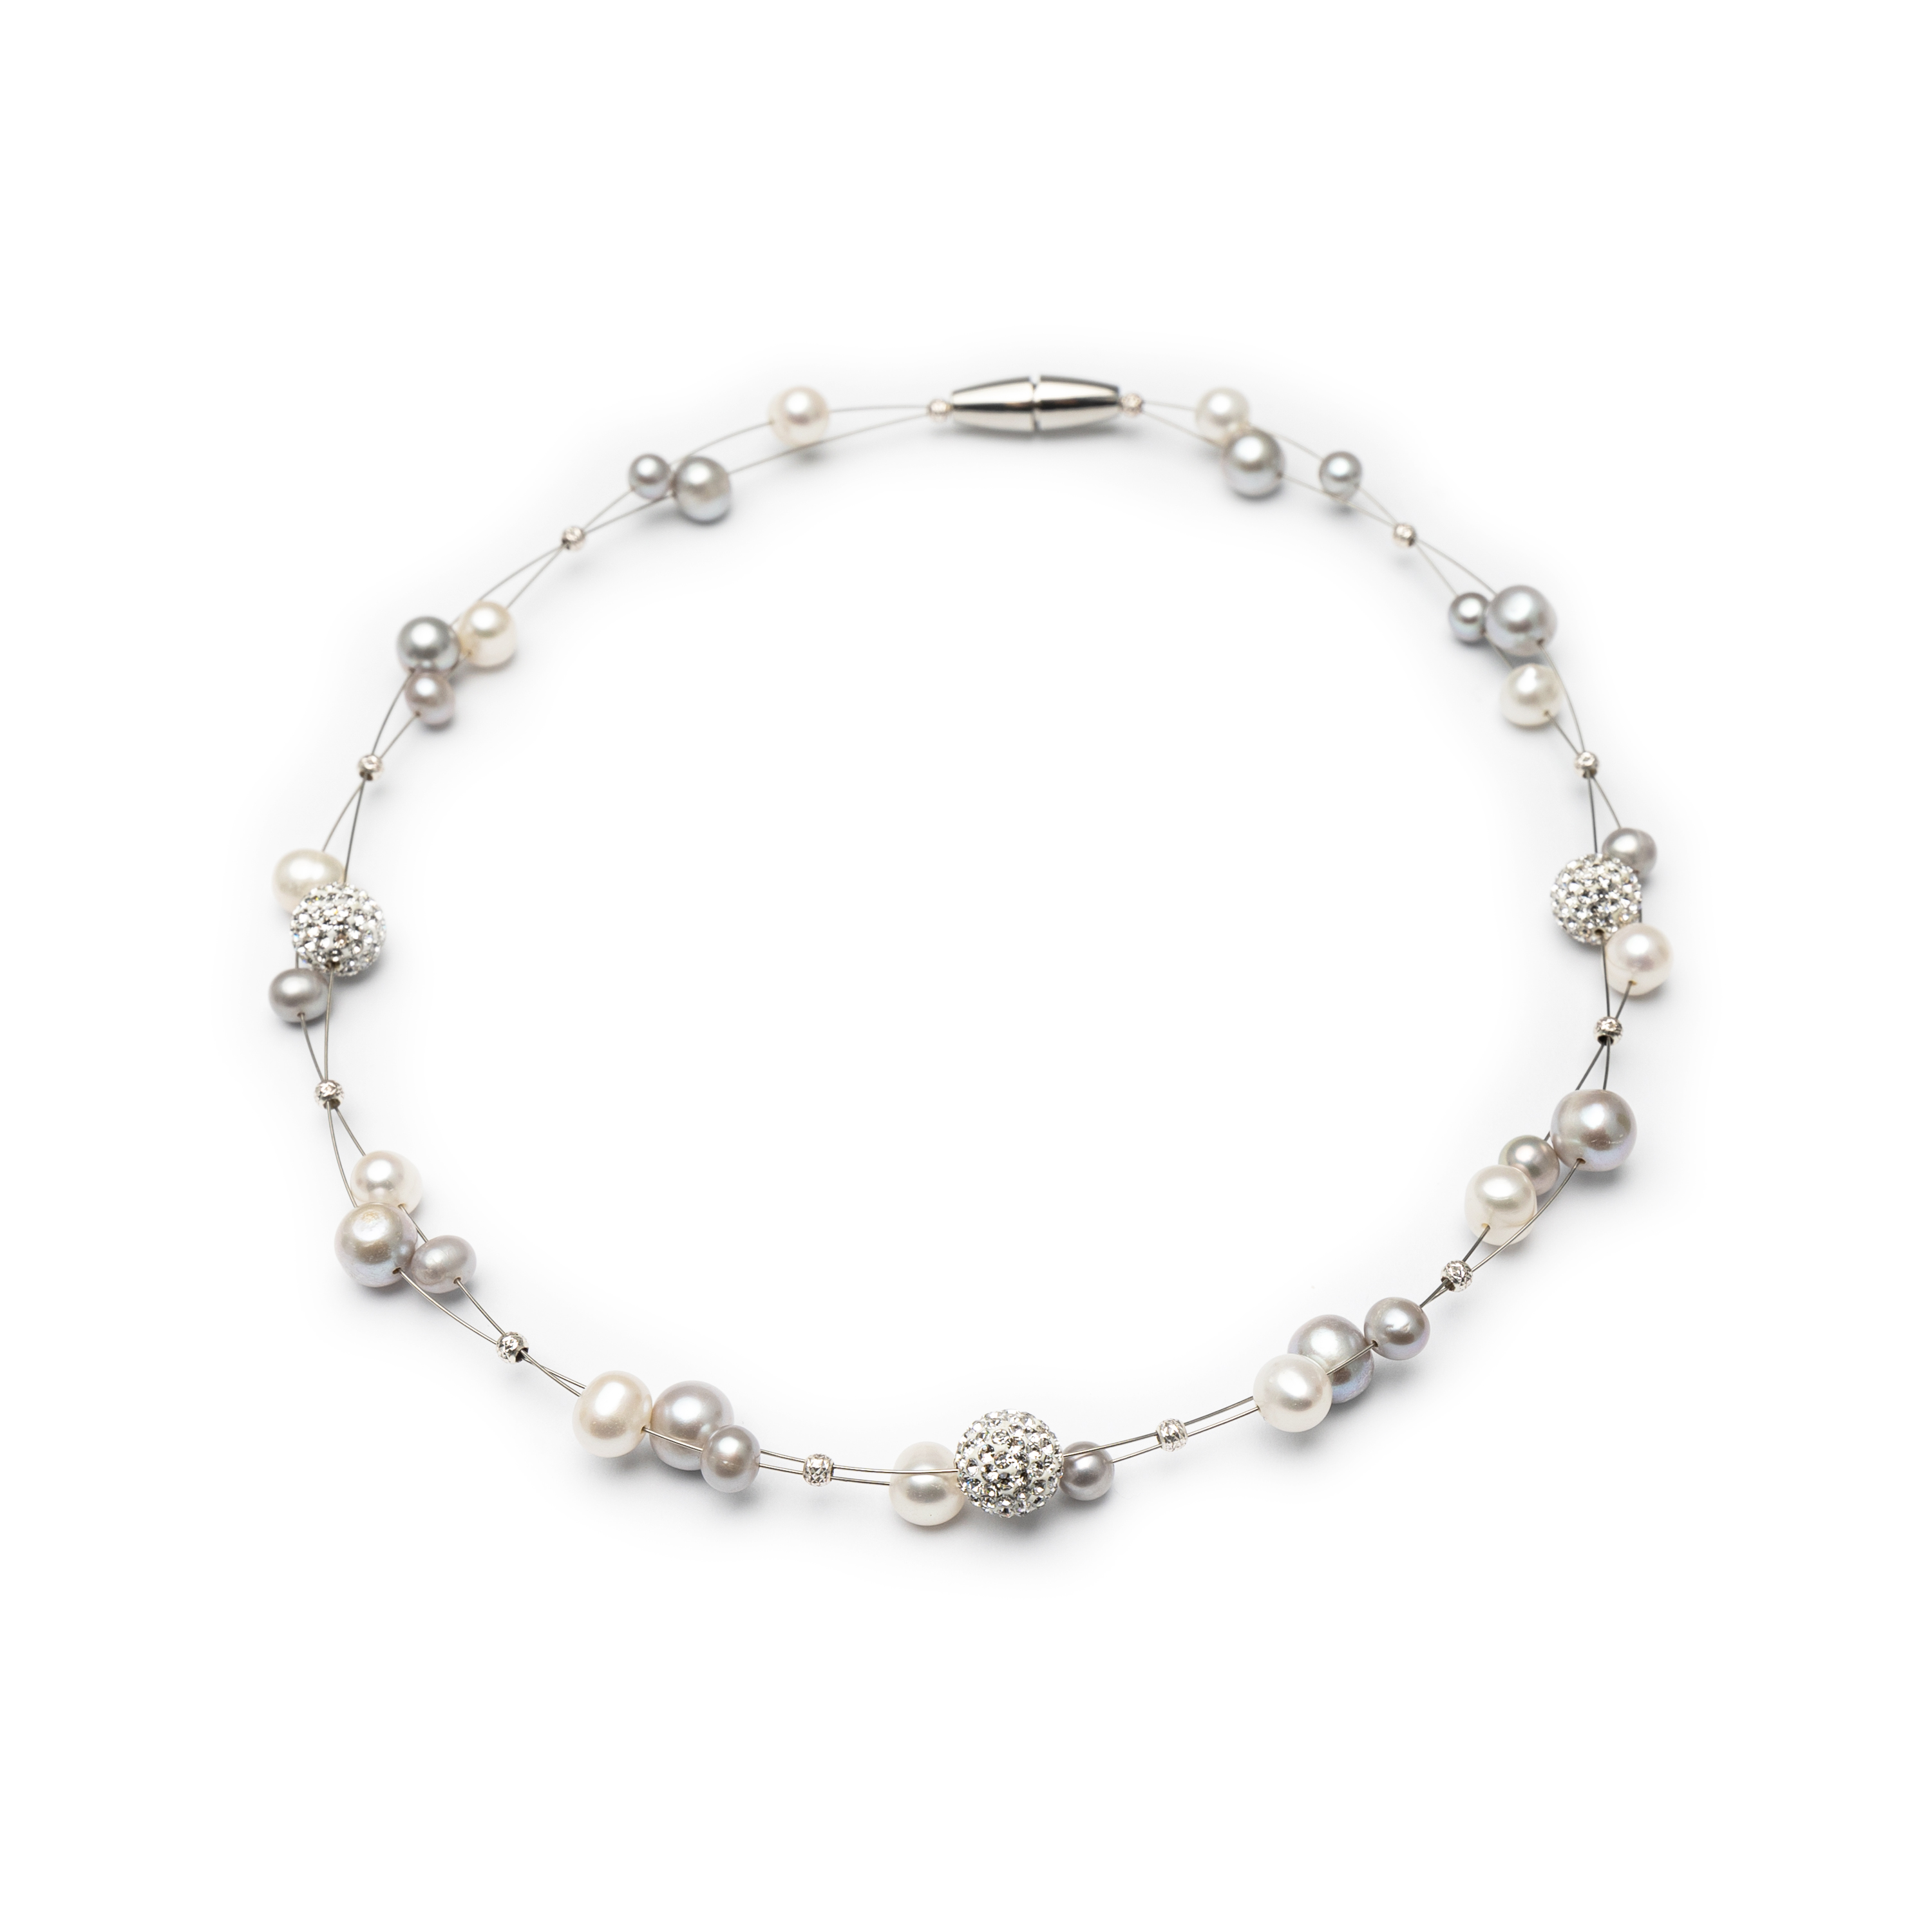 Silver 925, Fresh Water Pearl And Crystal Collier.